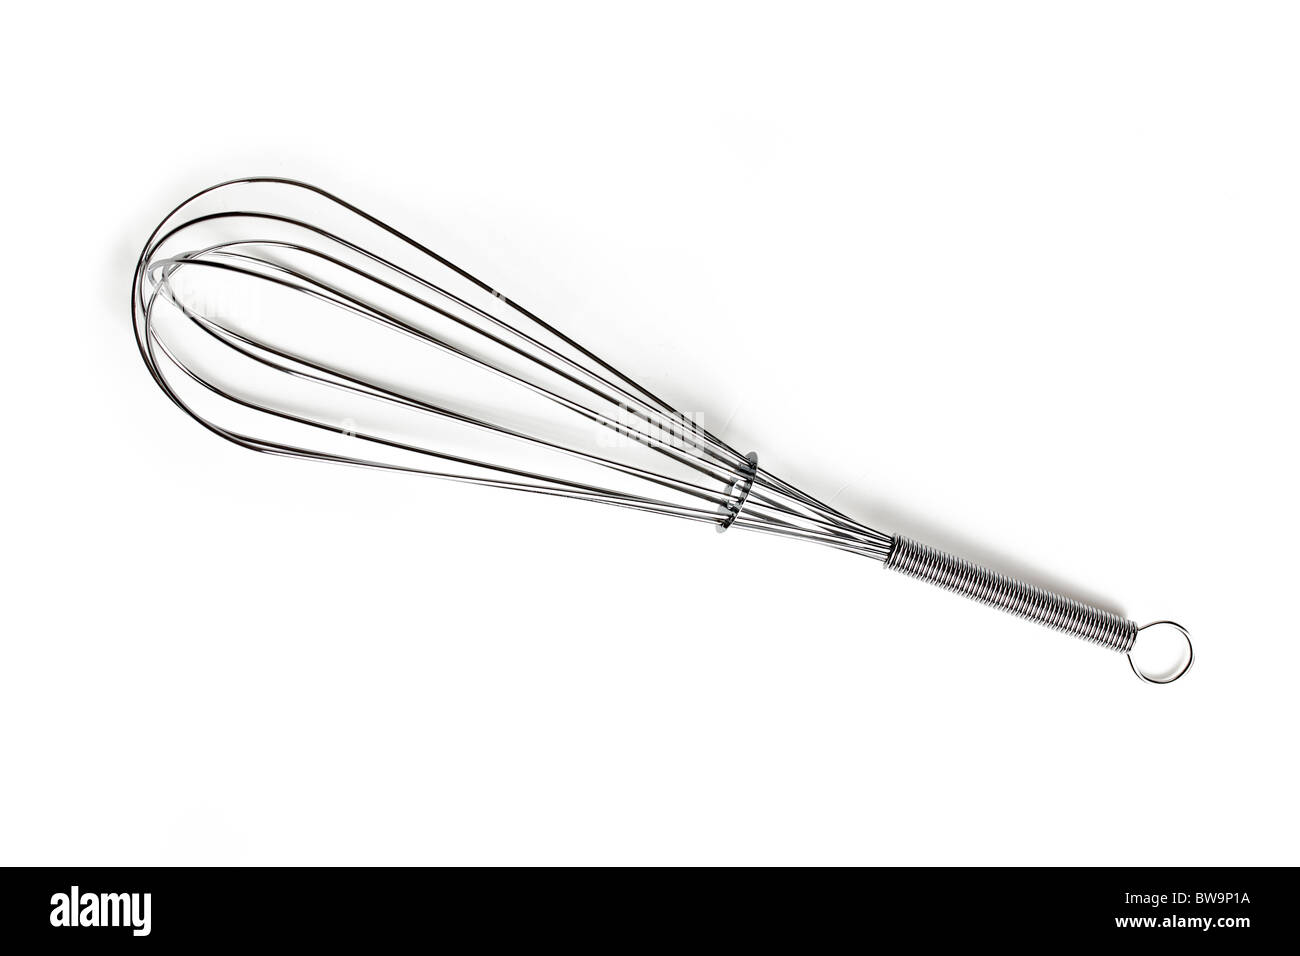 stainless steel whisk on white background Stock Photo